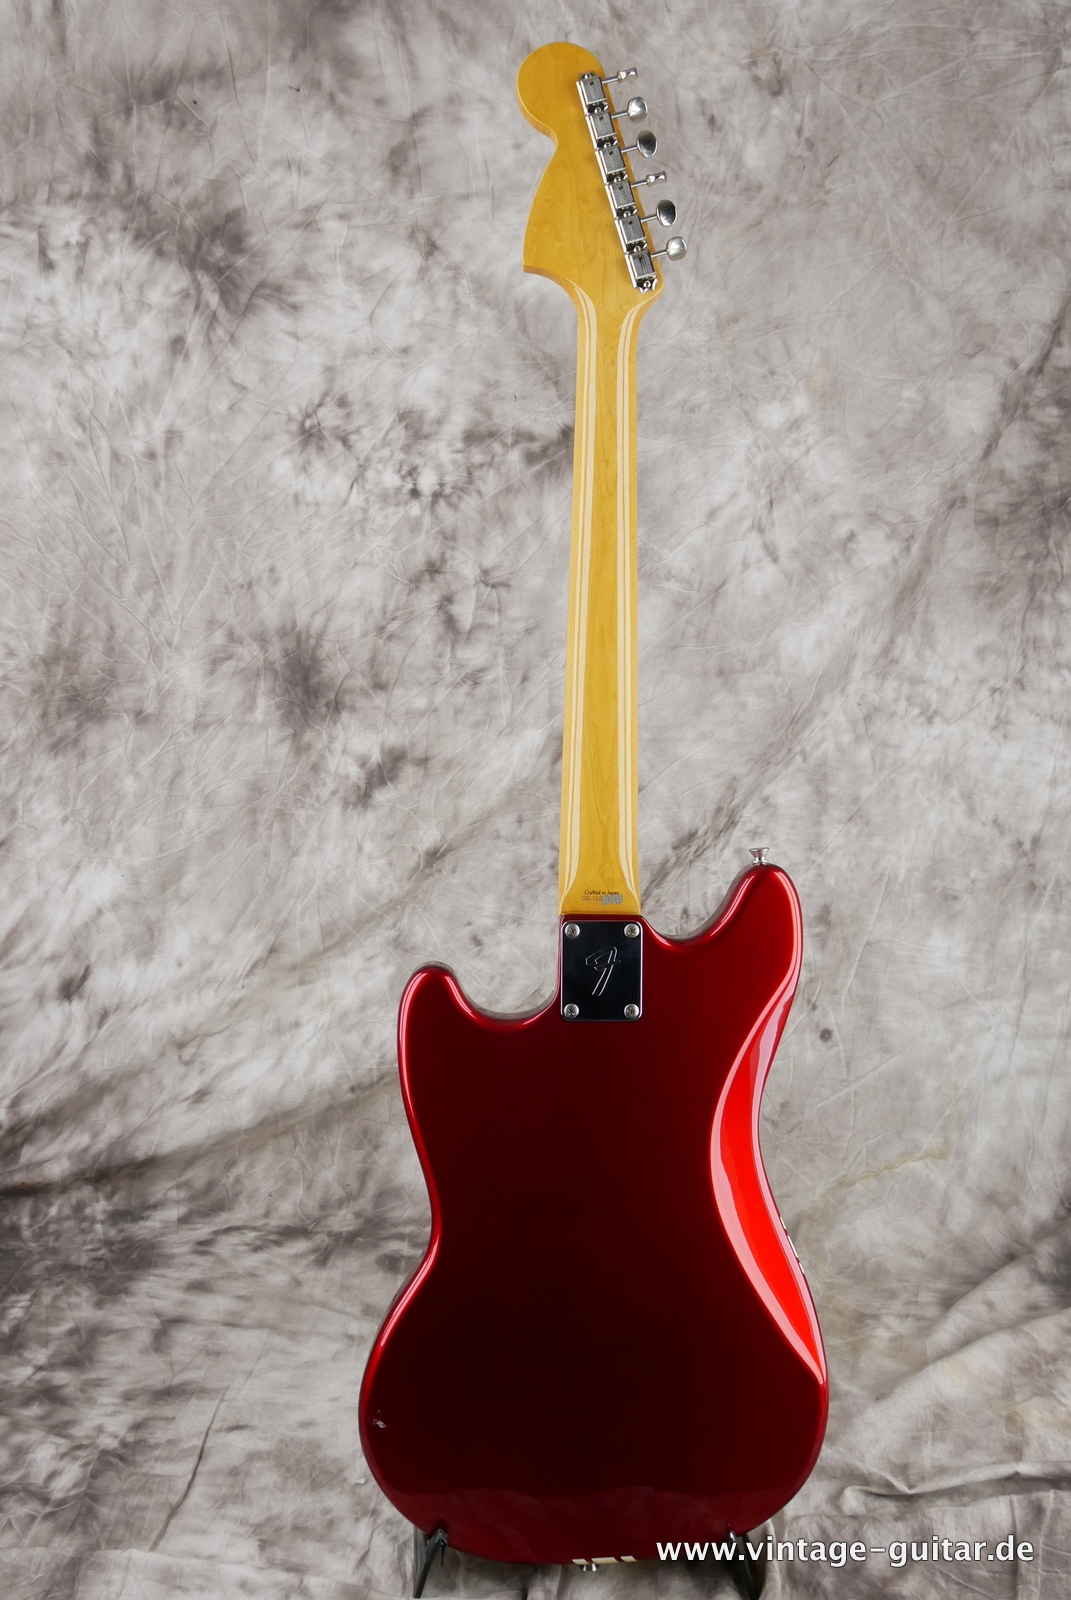 img/vintage/5133/Fender_Mustang_competition_70s_RI_candy_apple_red_Japan_2002-002.JPG